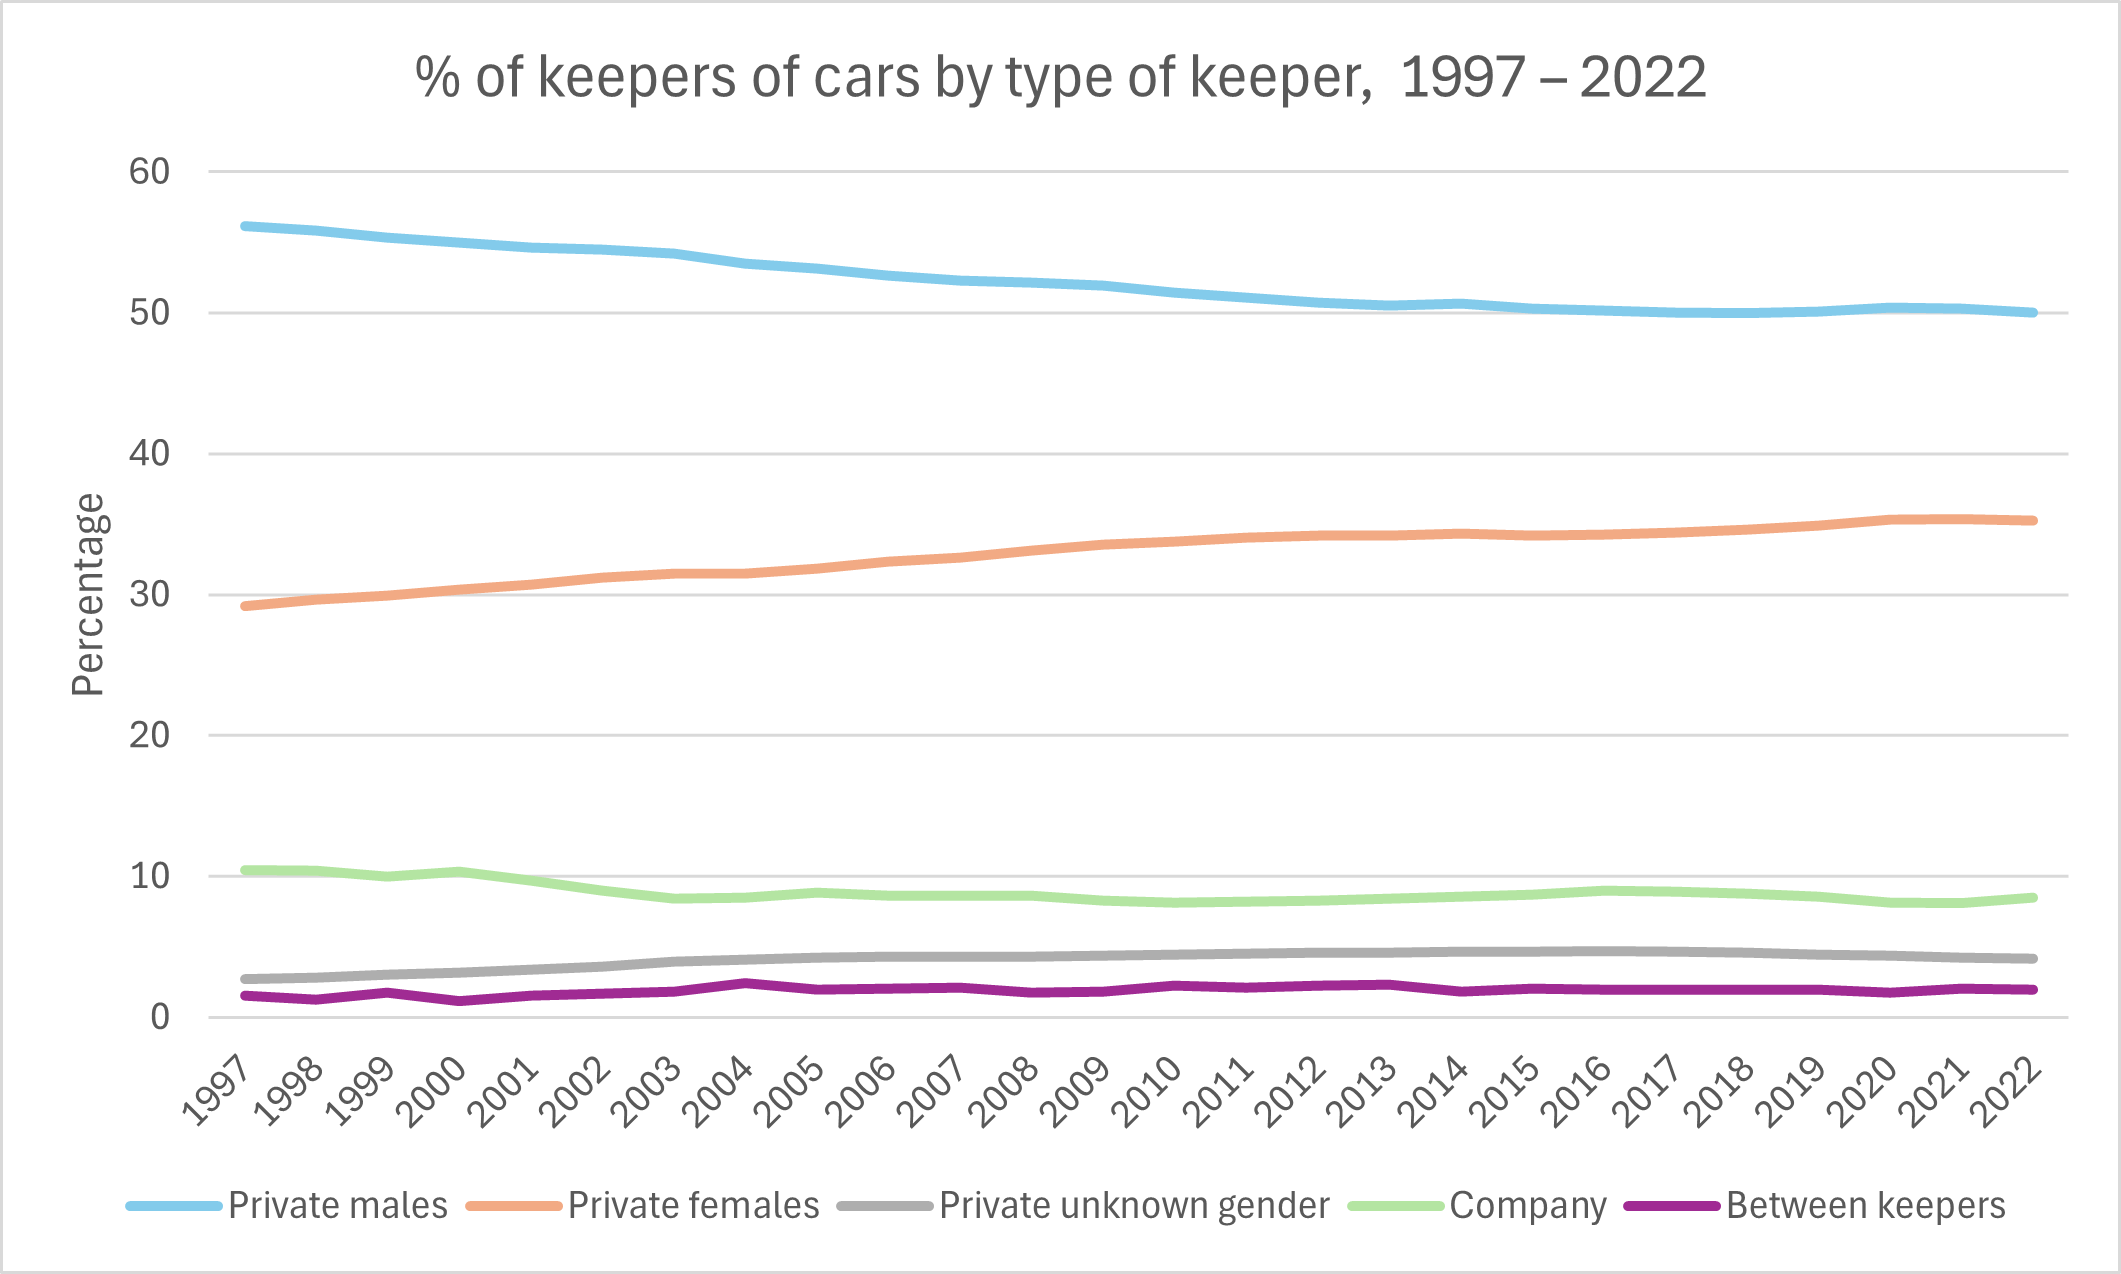 Keeper trends 1997 - 2022